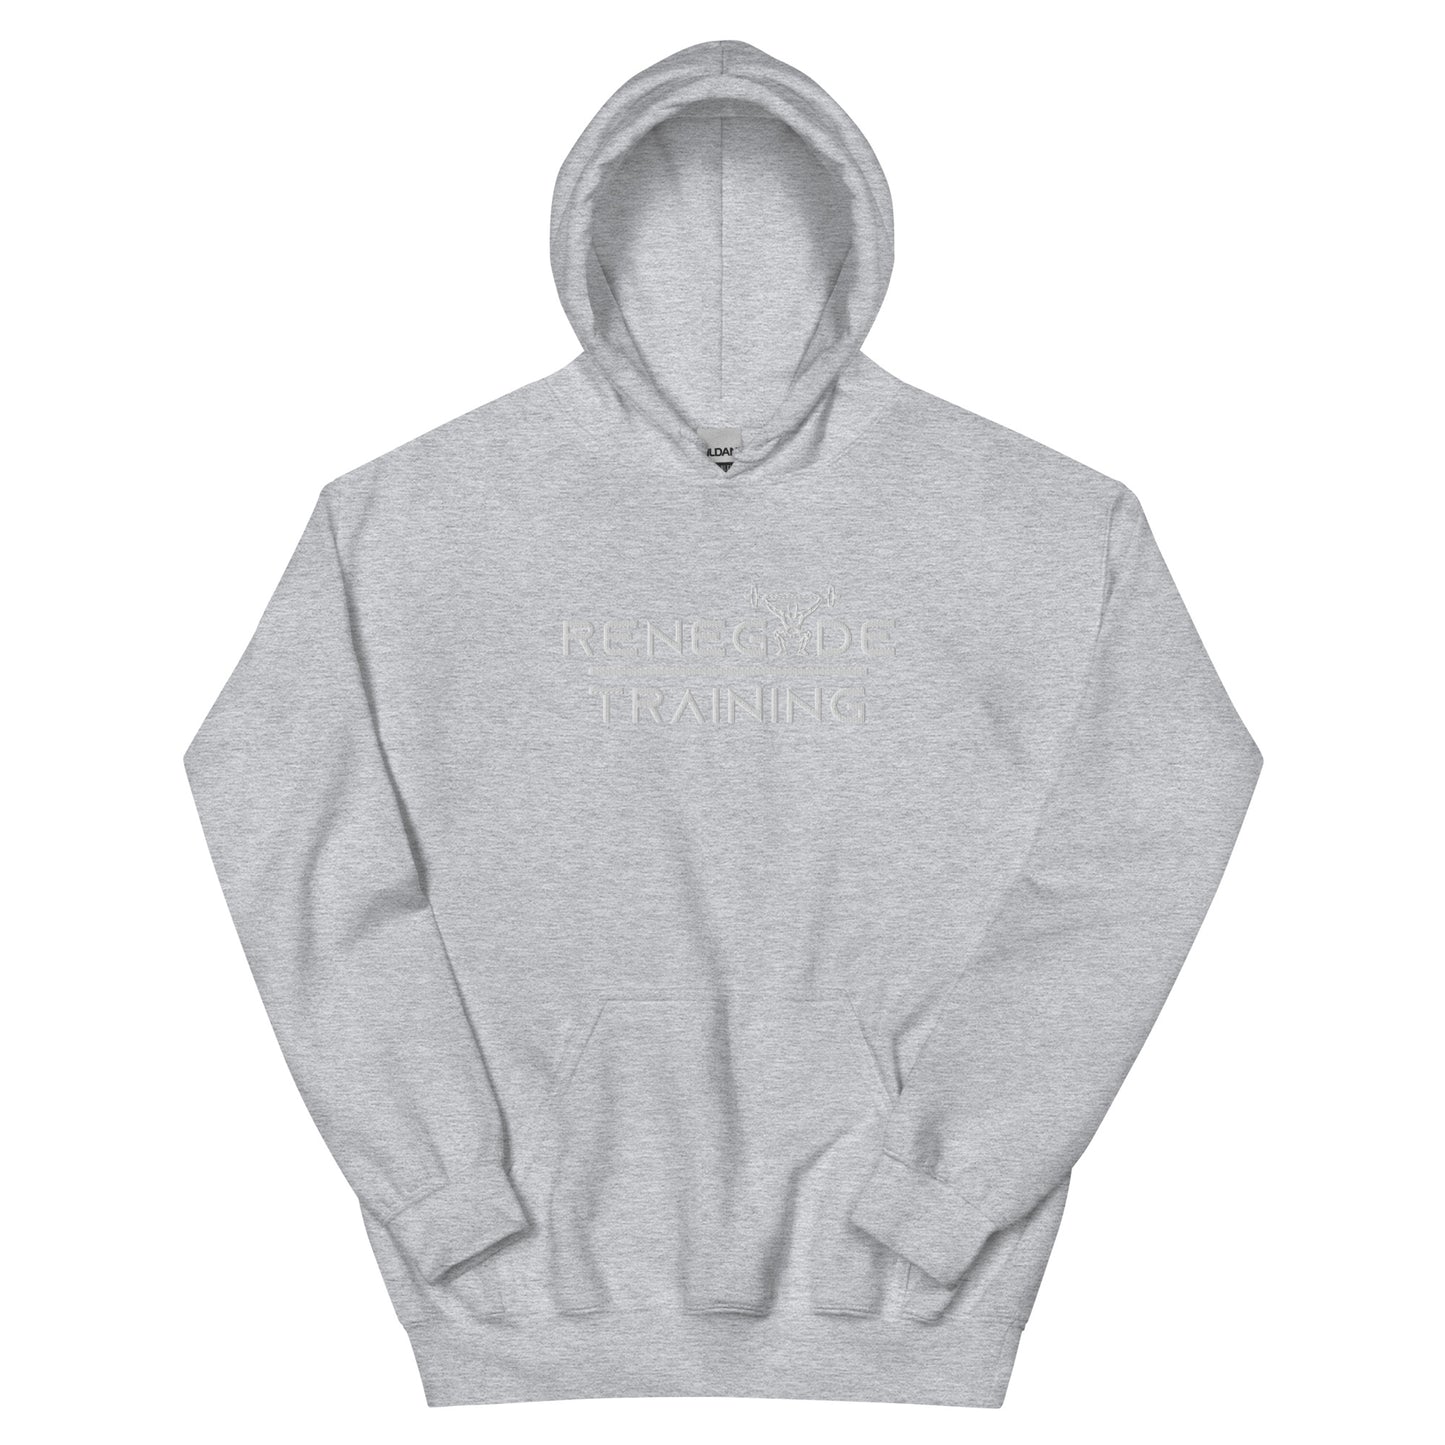 RT Uni-sex White Embroidered Hoodie